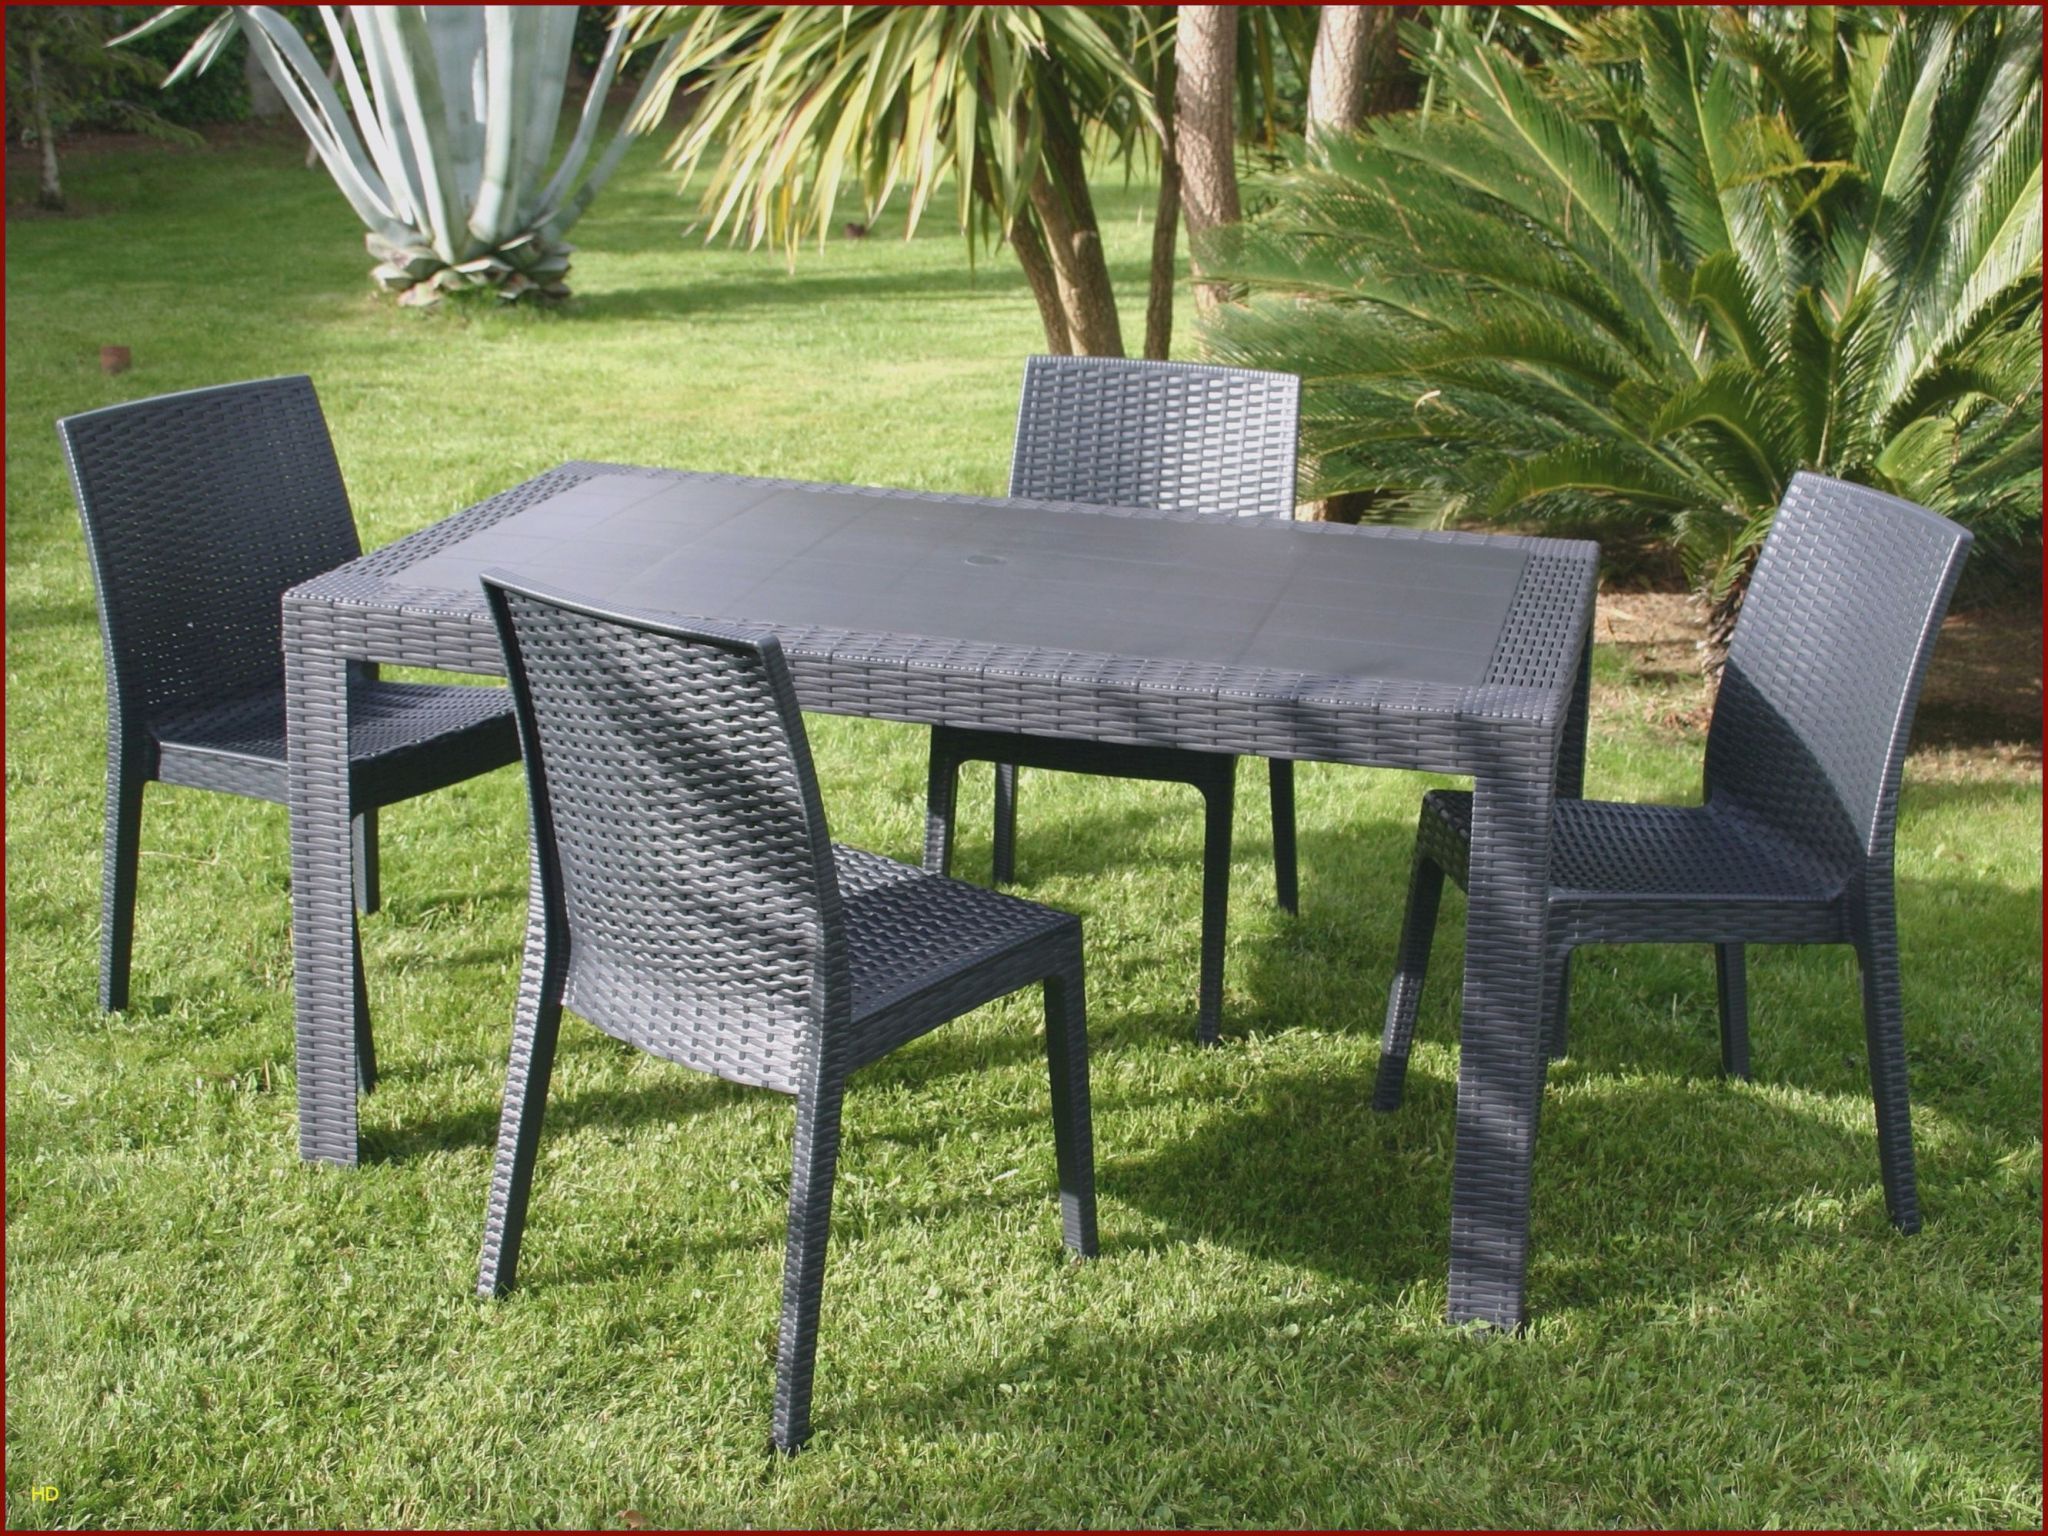 Table Et Chaise Bistrot Beau Chaises Luxe Chaise Ice 0d Table Jardin Resine Lovely